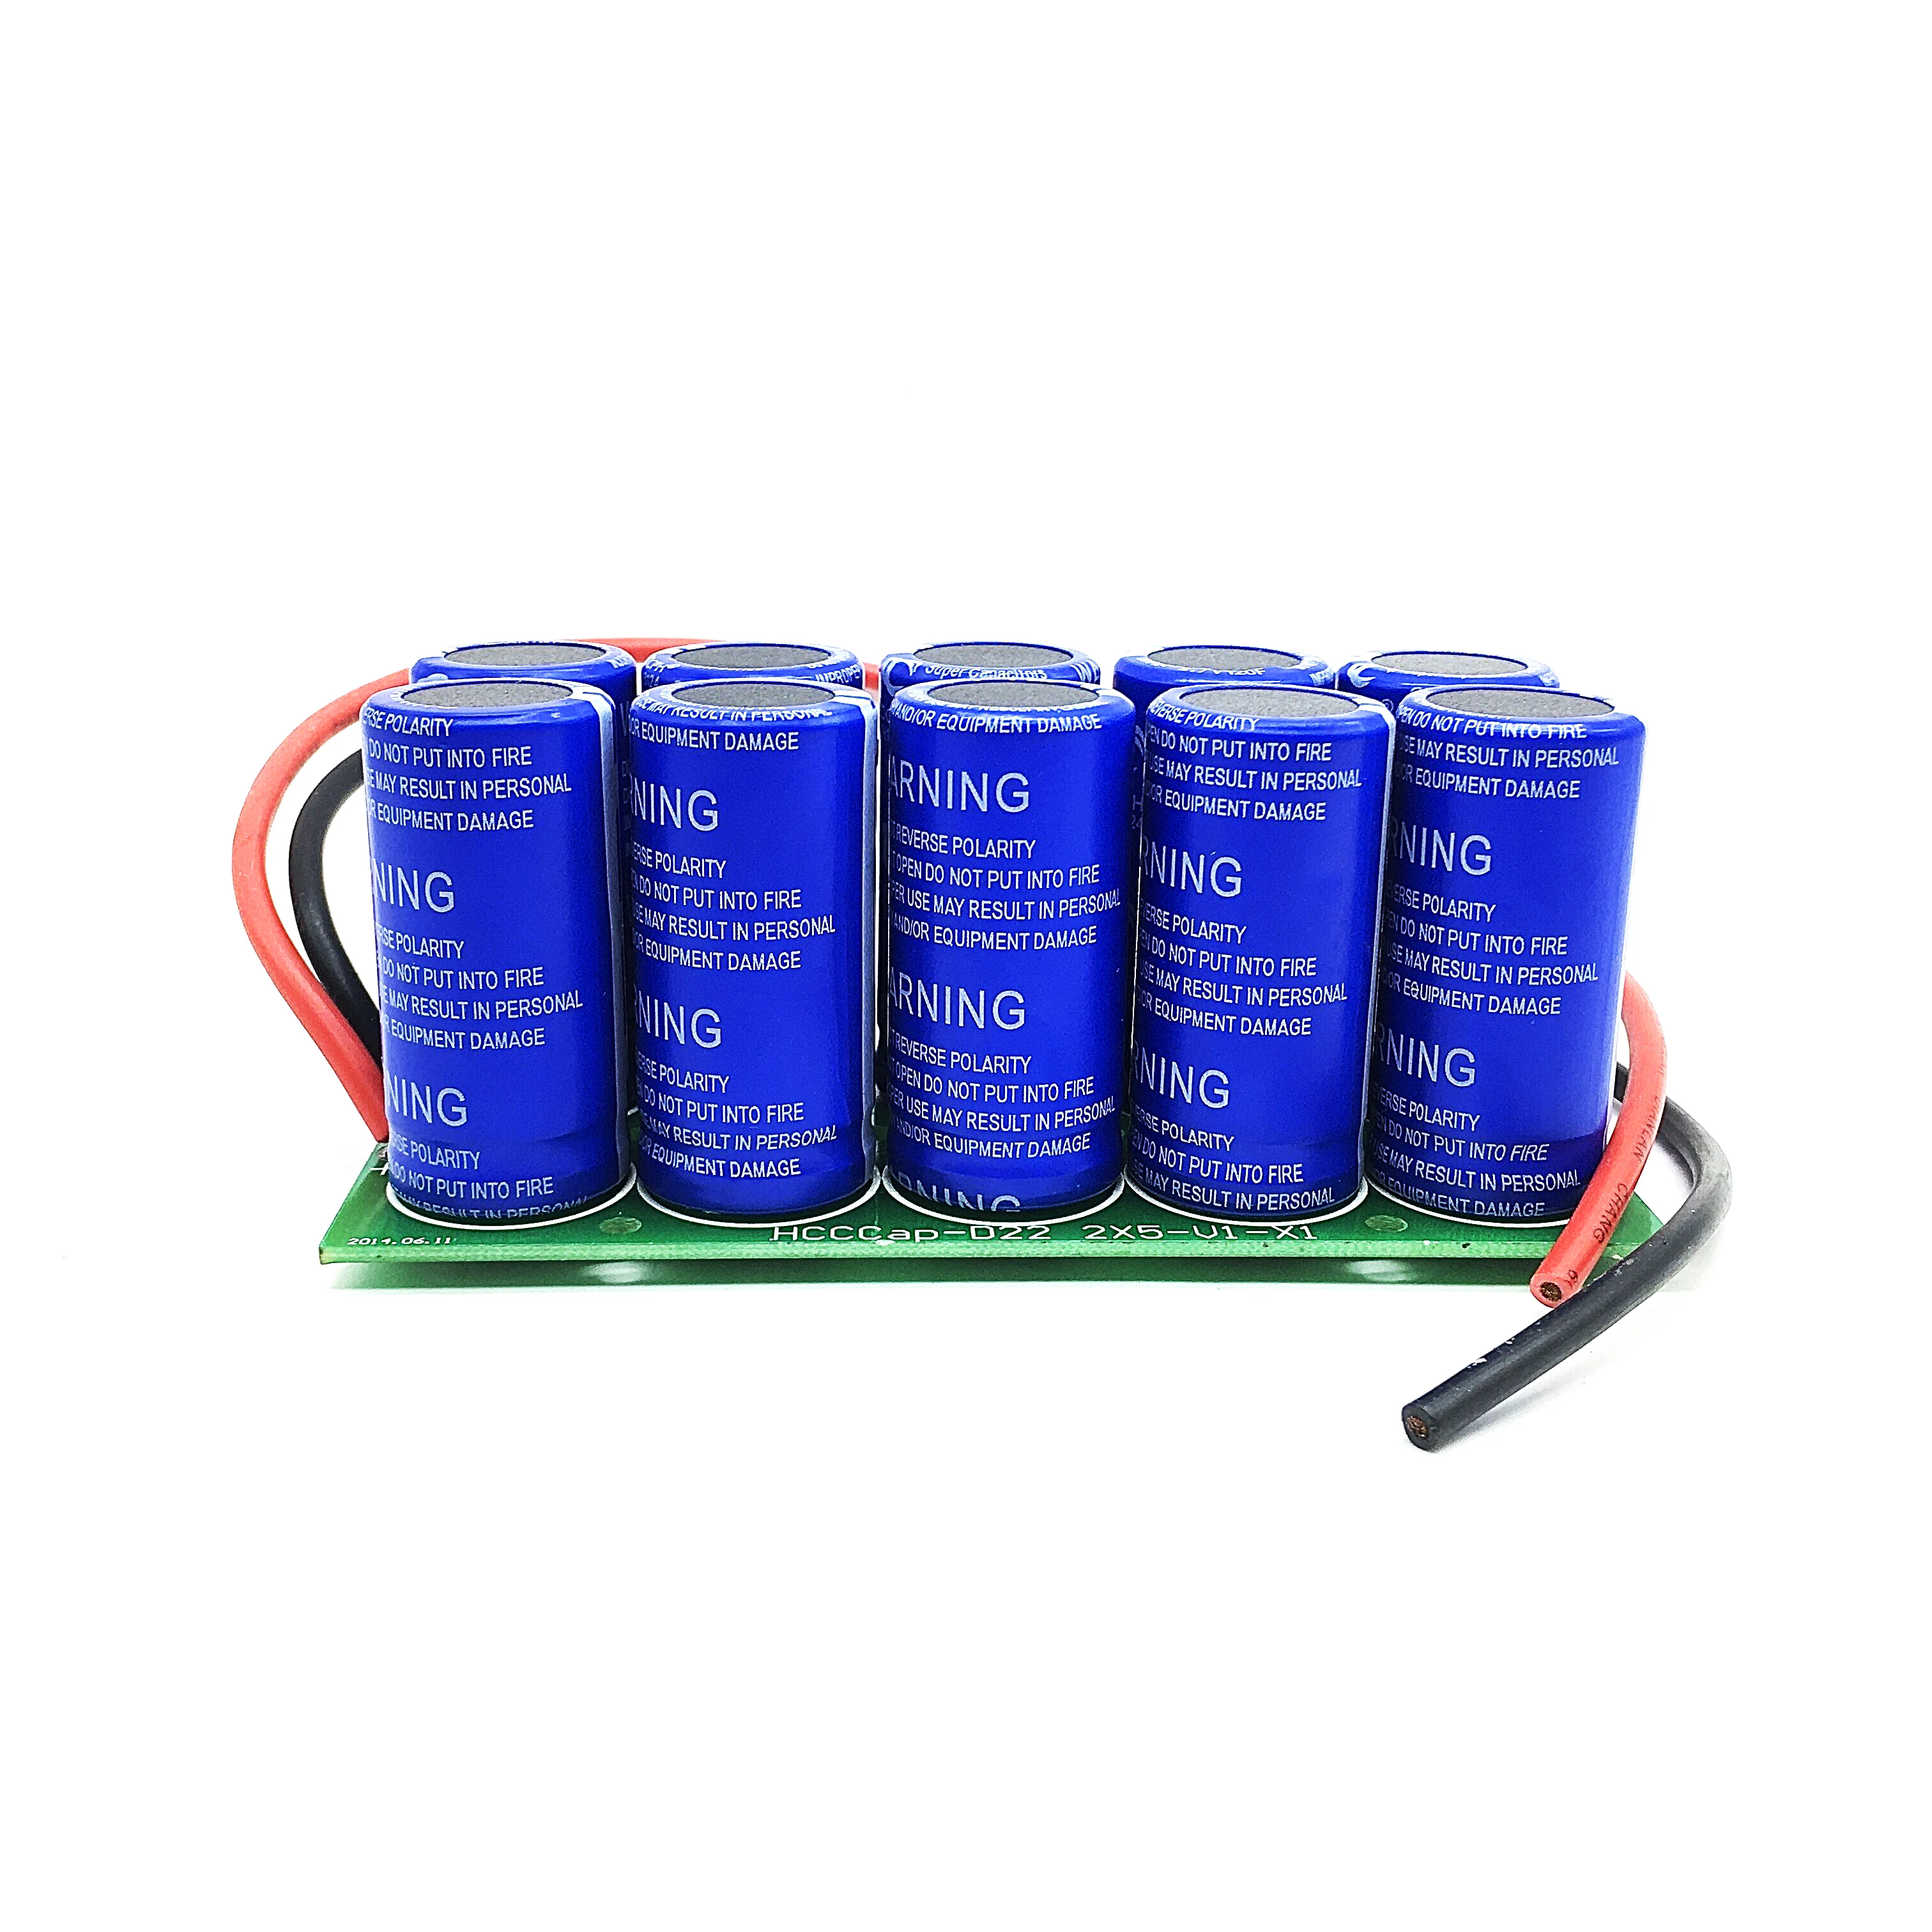 Super Capacitors Farad Capacitor Modules 27V 12F SuperCapacitors With Double Protection Board With Line UltraCapacitor cell protective board modules 3s 12 6v 8a replacement for 18650 li ion cell